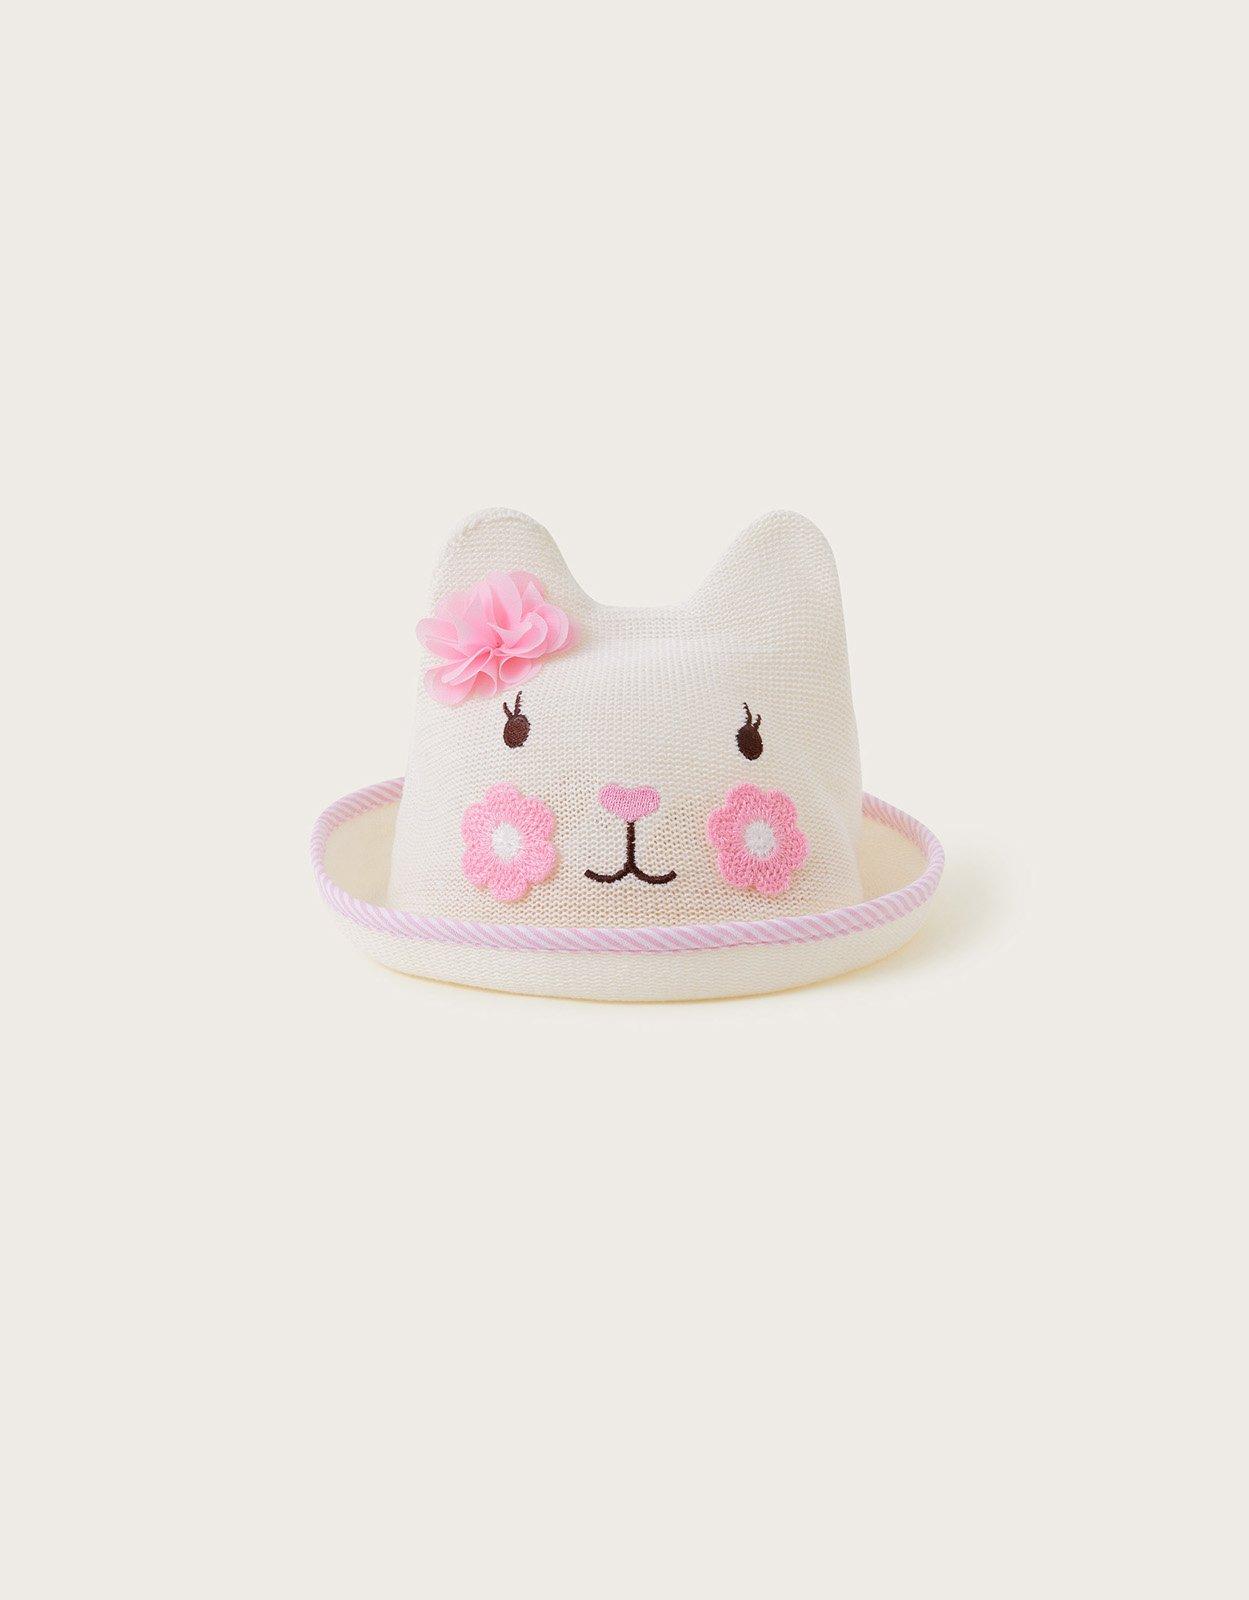 Baby Darcy Kitty Bowler Hat